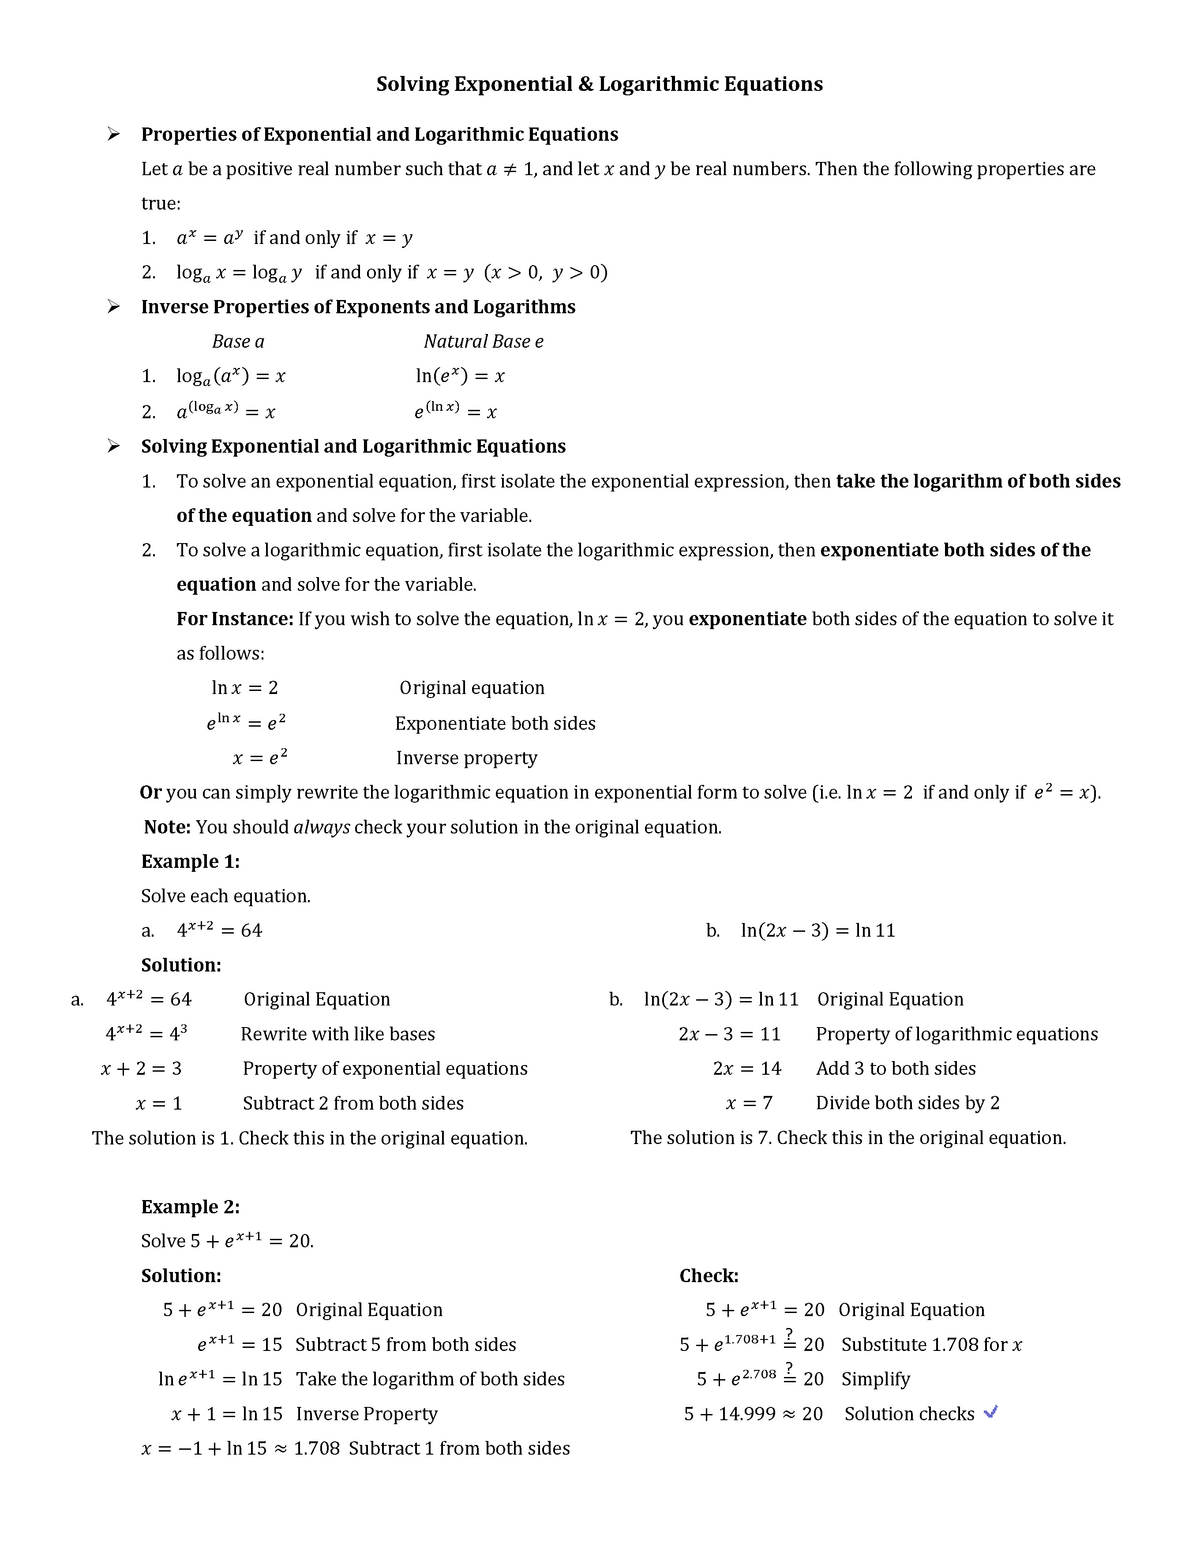 Solving Exponential and Logarithmic Equations worksheet - StuDocu Intended For Solving Logarithmic Equations Worksheet